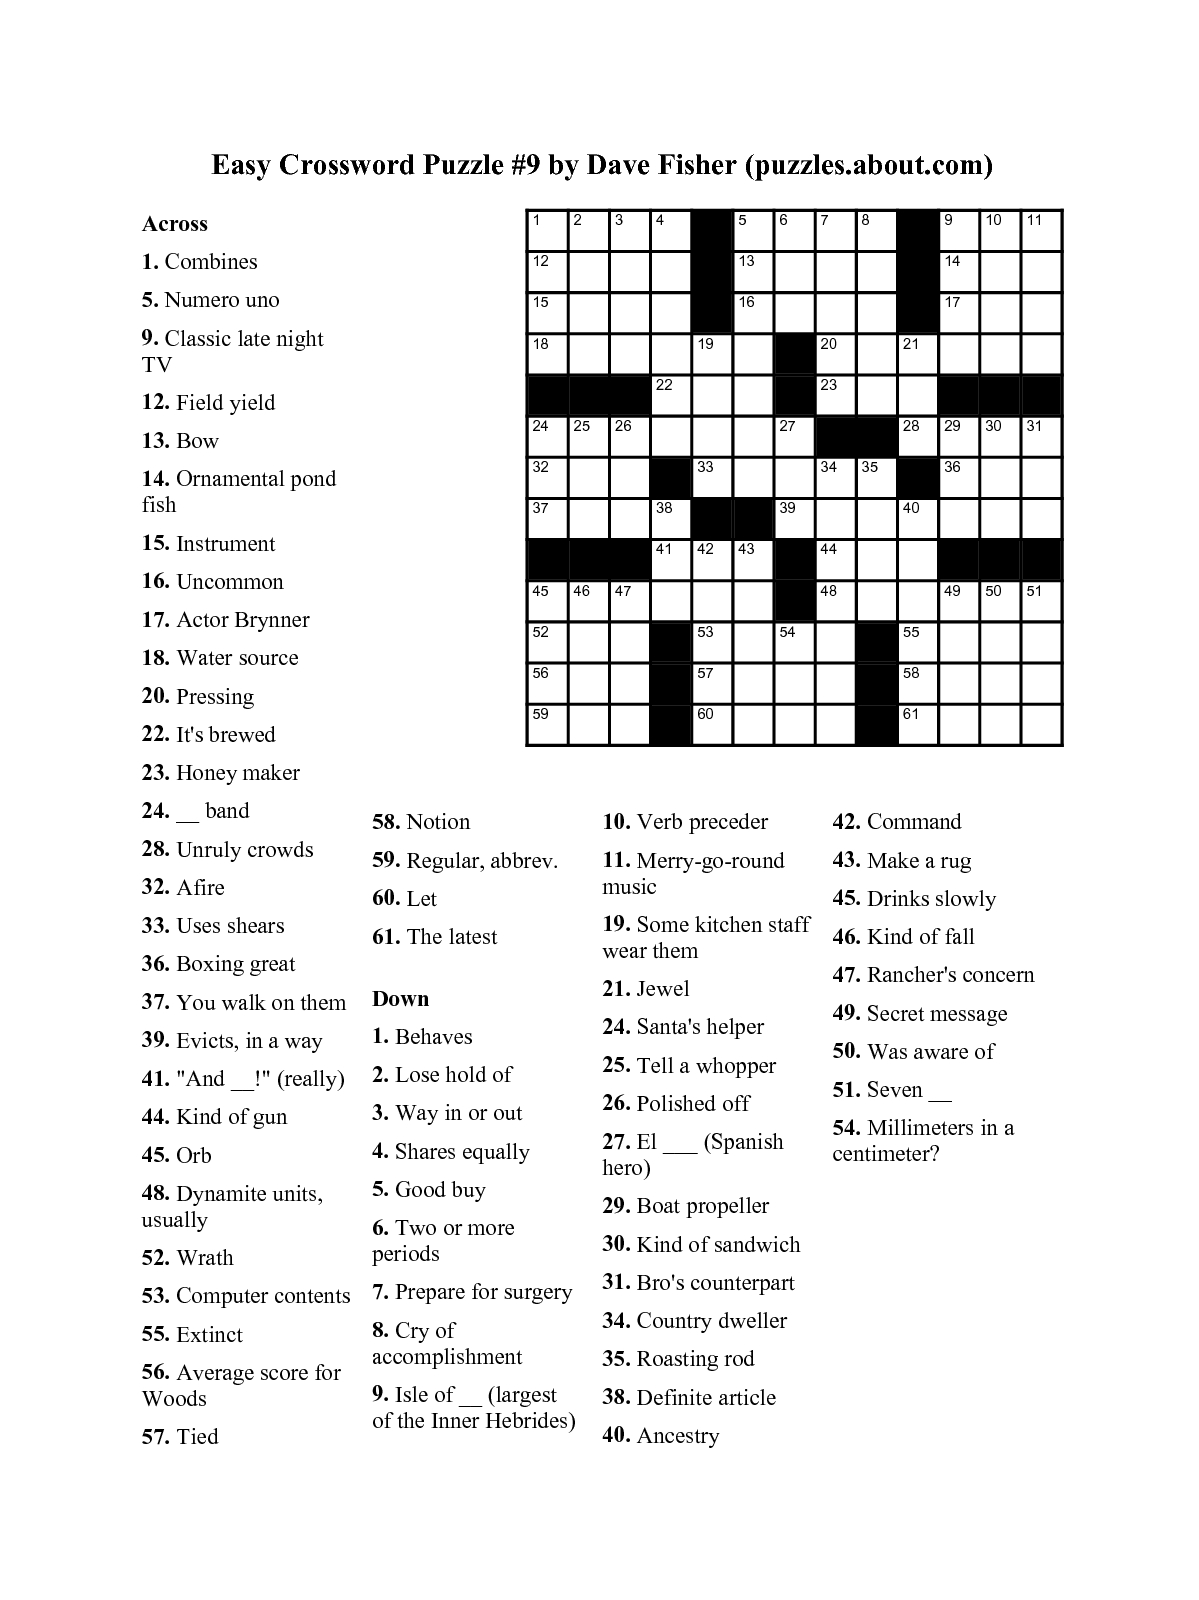 Easy Crossword Puzzle _9Dave Fisher _Puzzlesaboutcom_Lonyoo - Free Printable Easy Crossword Puzzles For Beginners